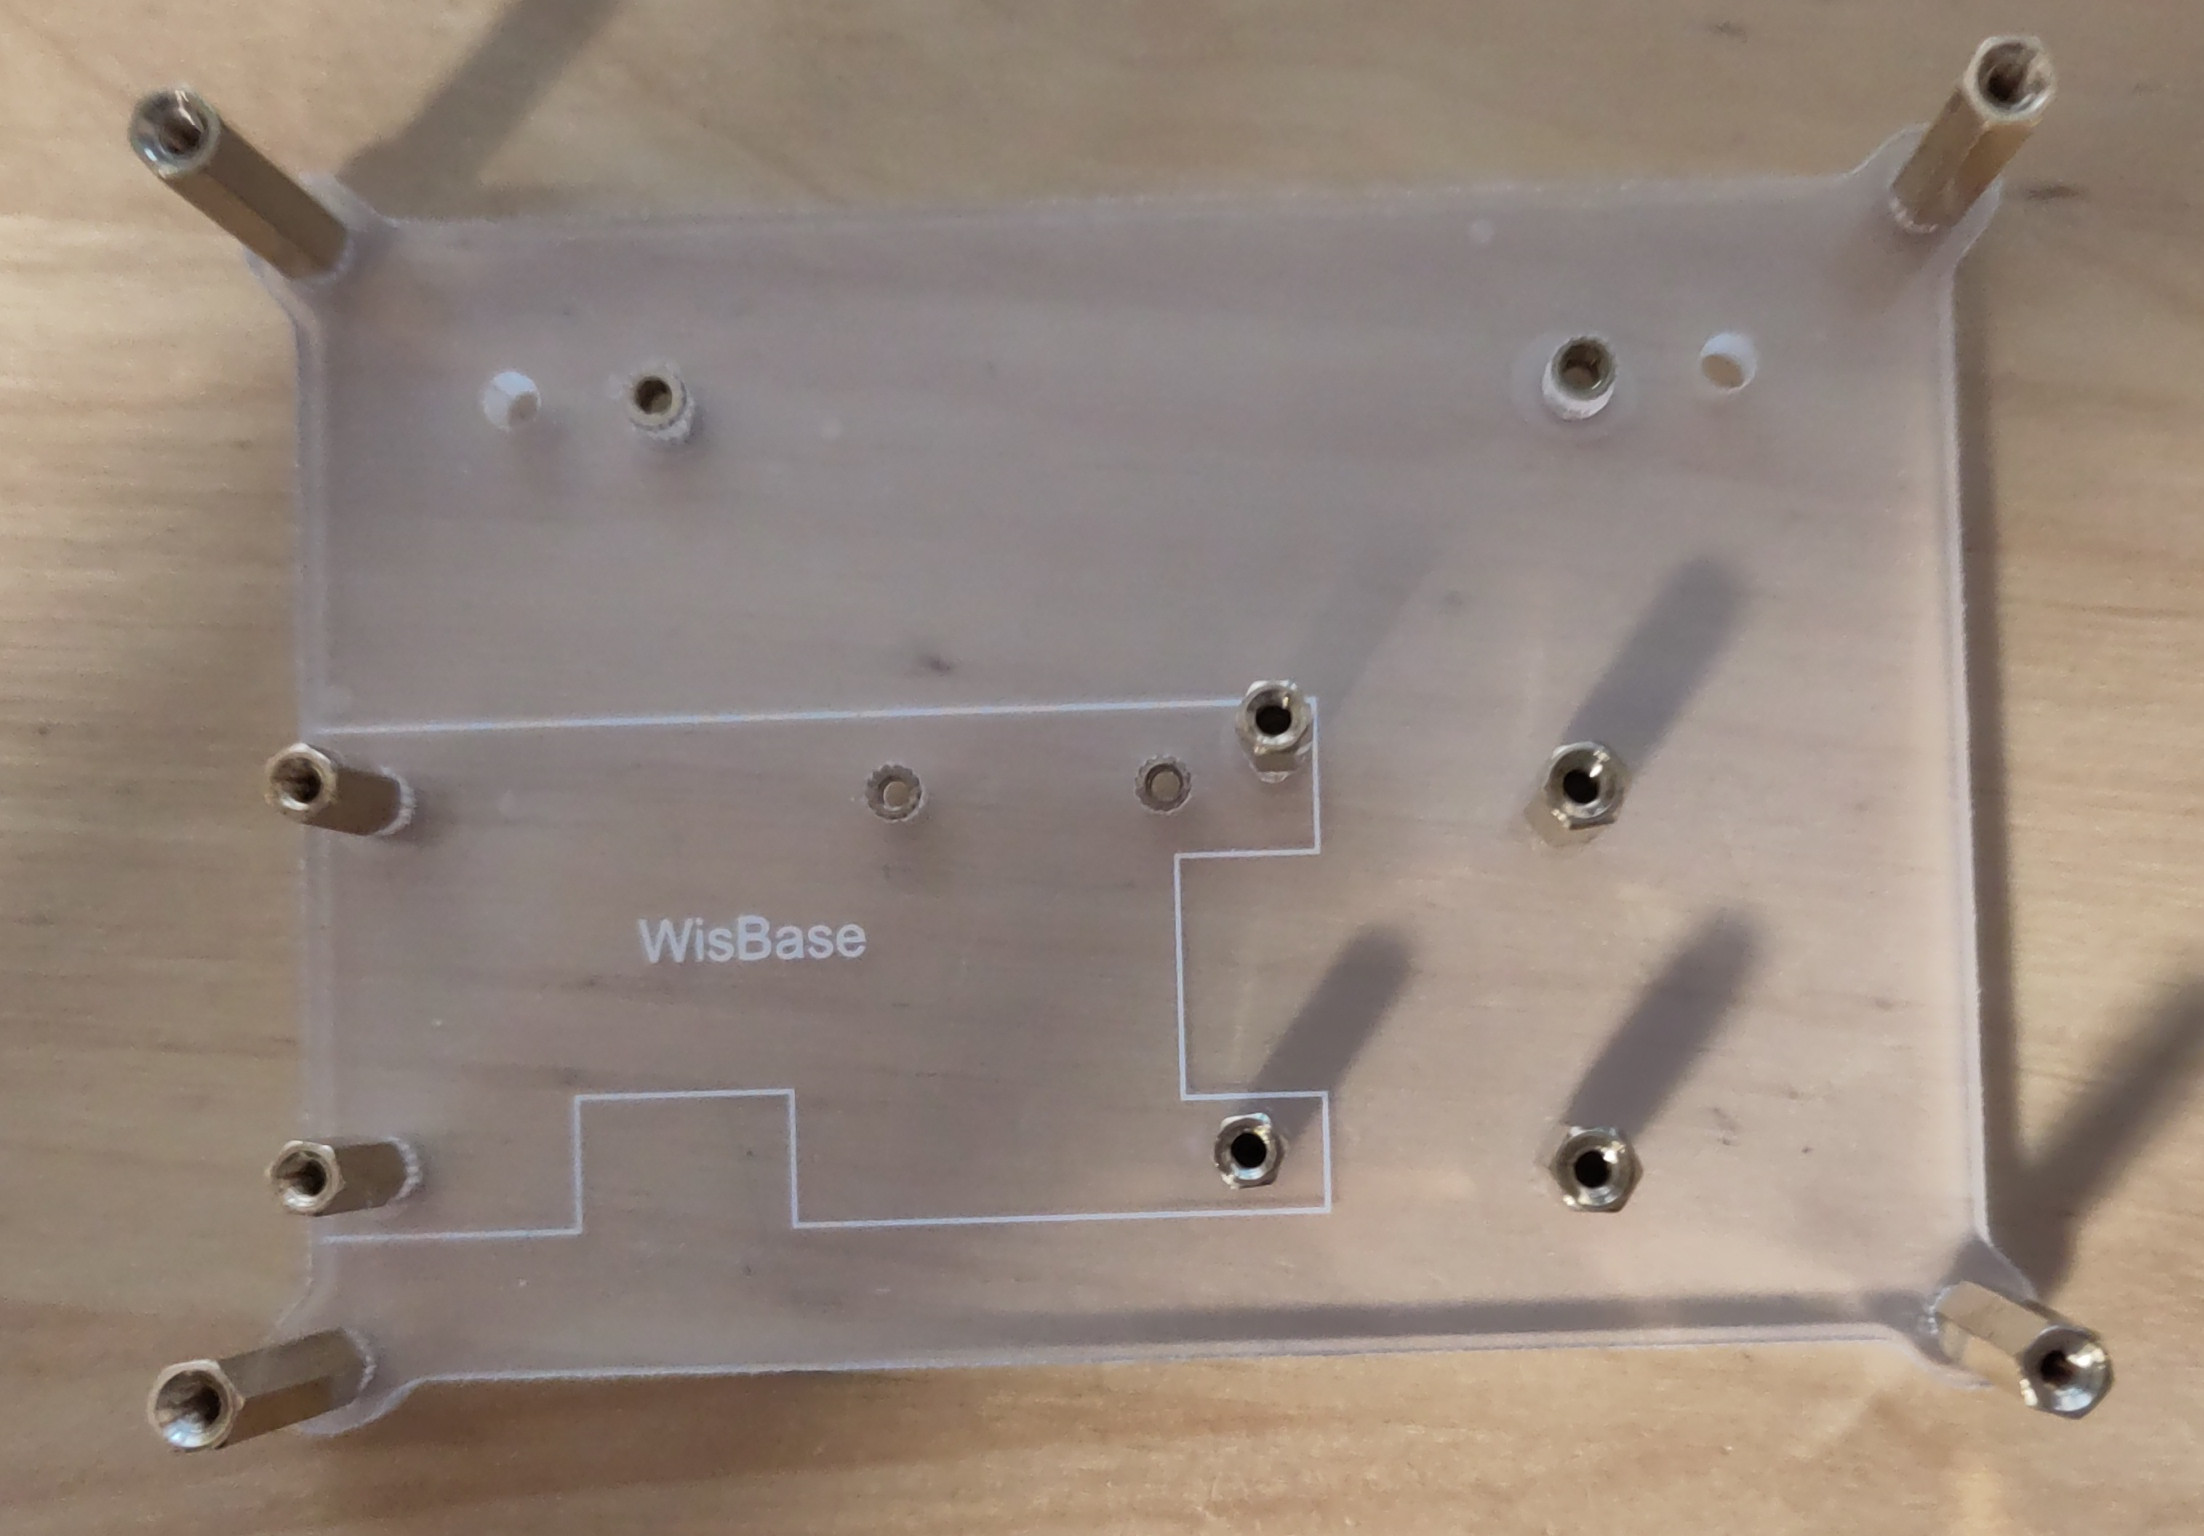 You can see one of the plastic parts. Among other things, there is an area marked with "WisBase".